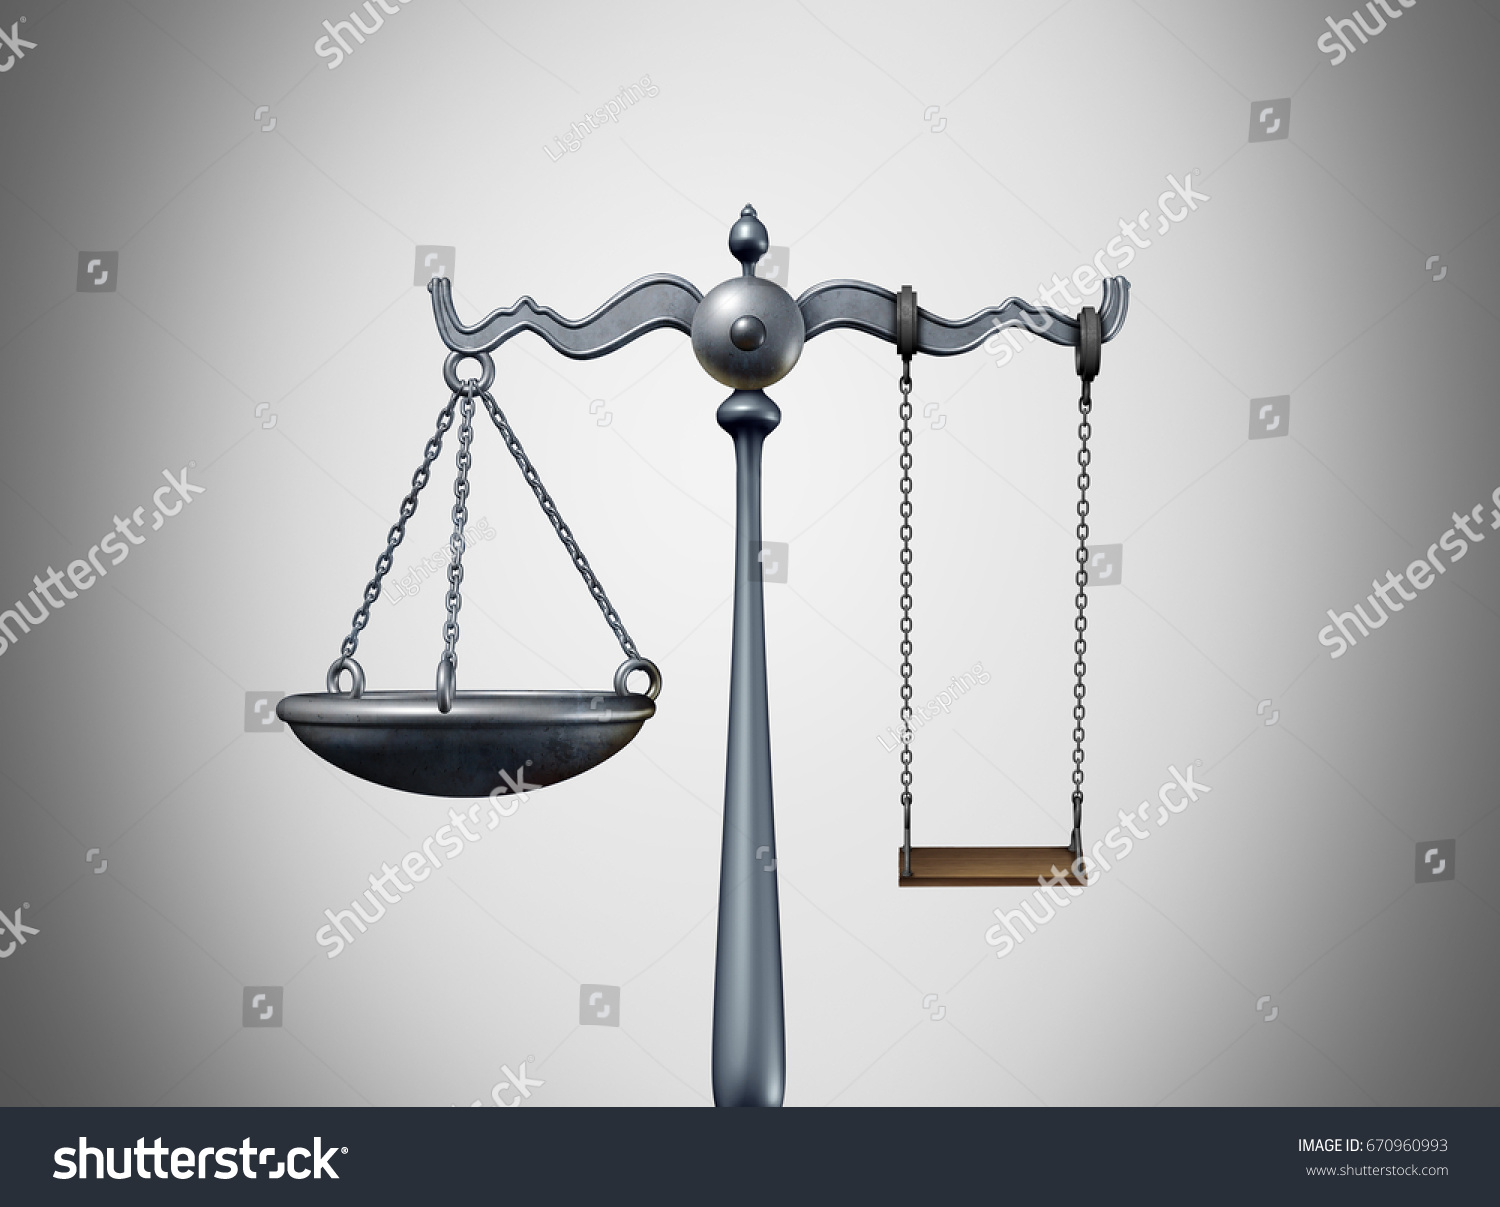 8,902 Law youth Images, Stock Photos & Vectors | Shutterstock